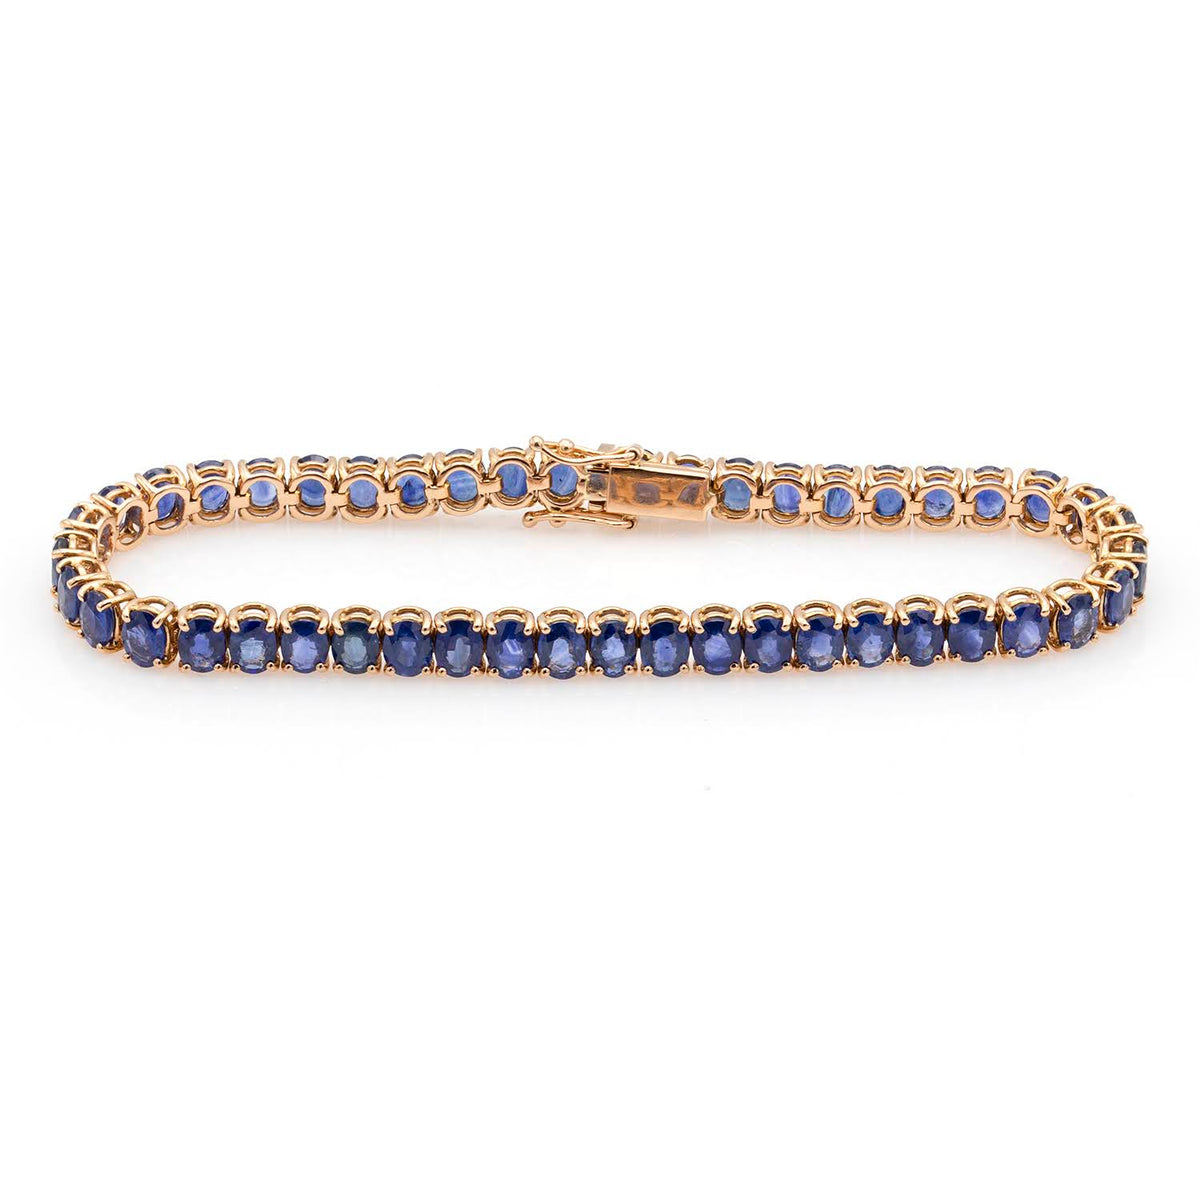 Oval Cut Sapphire 12.35ct Bracelet – New York Collection